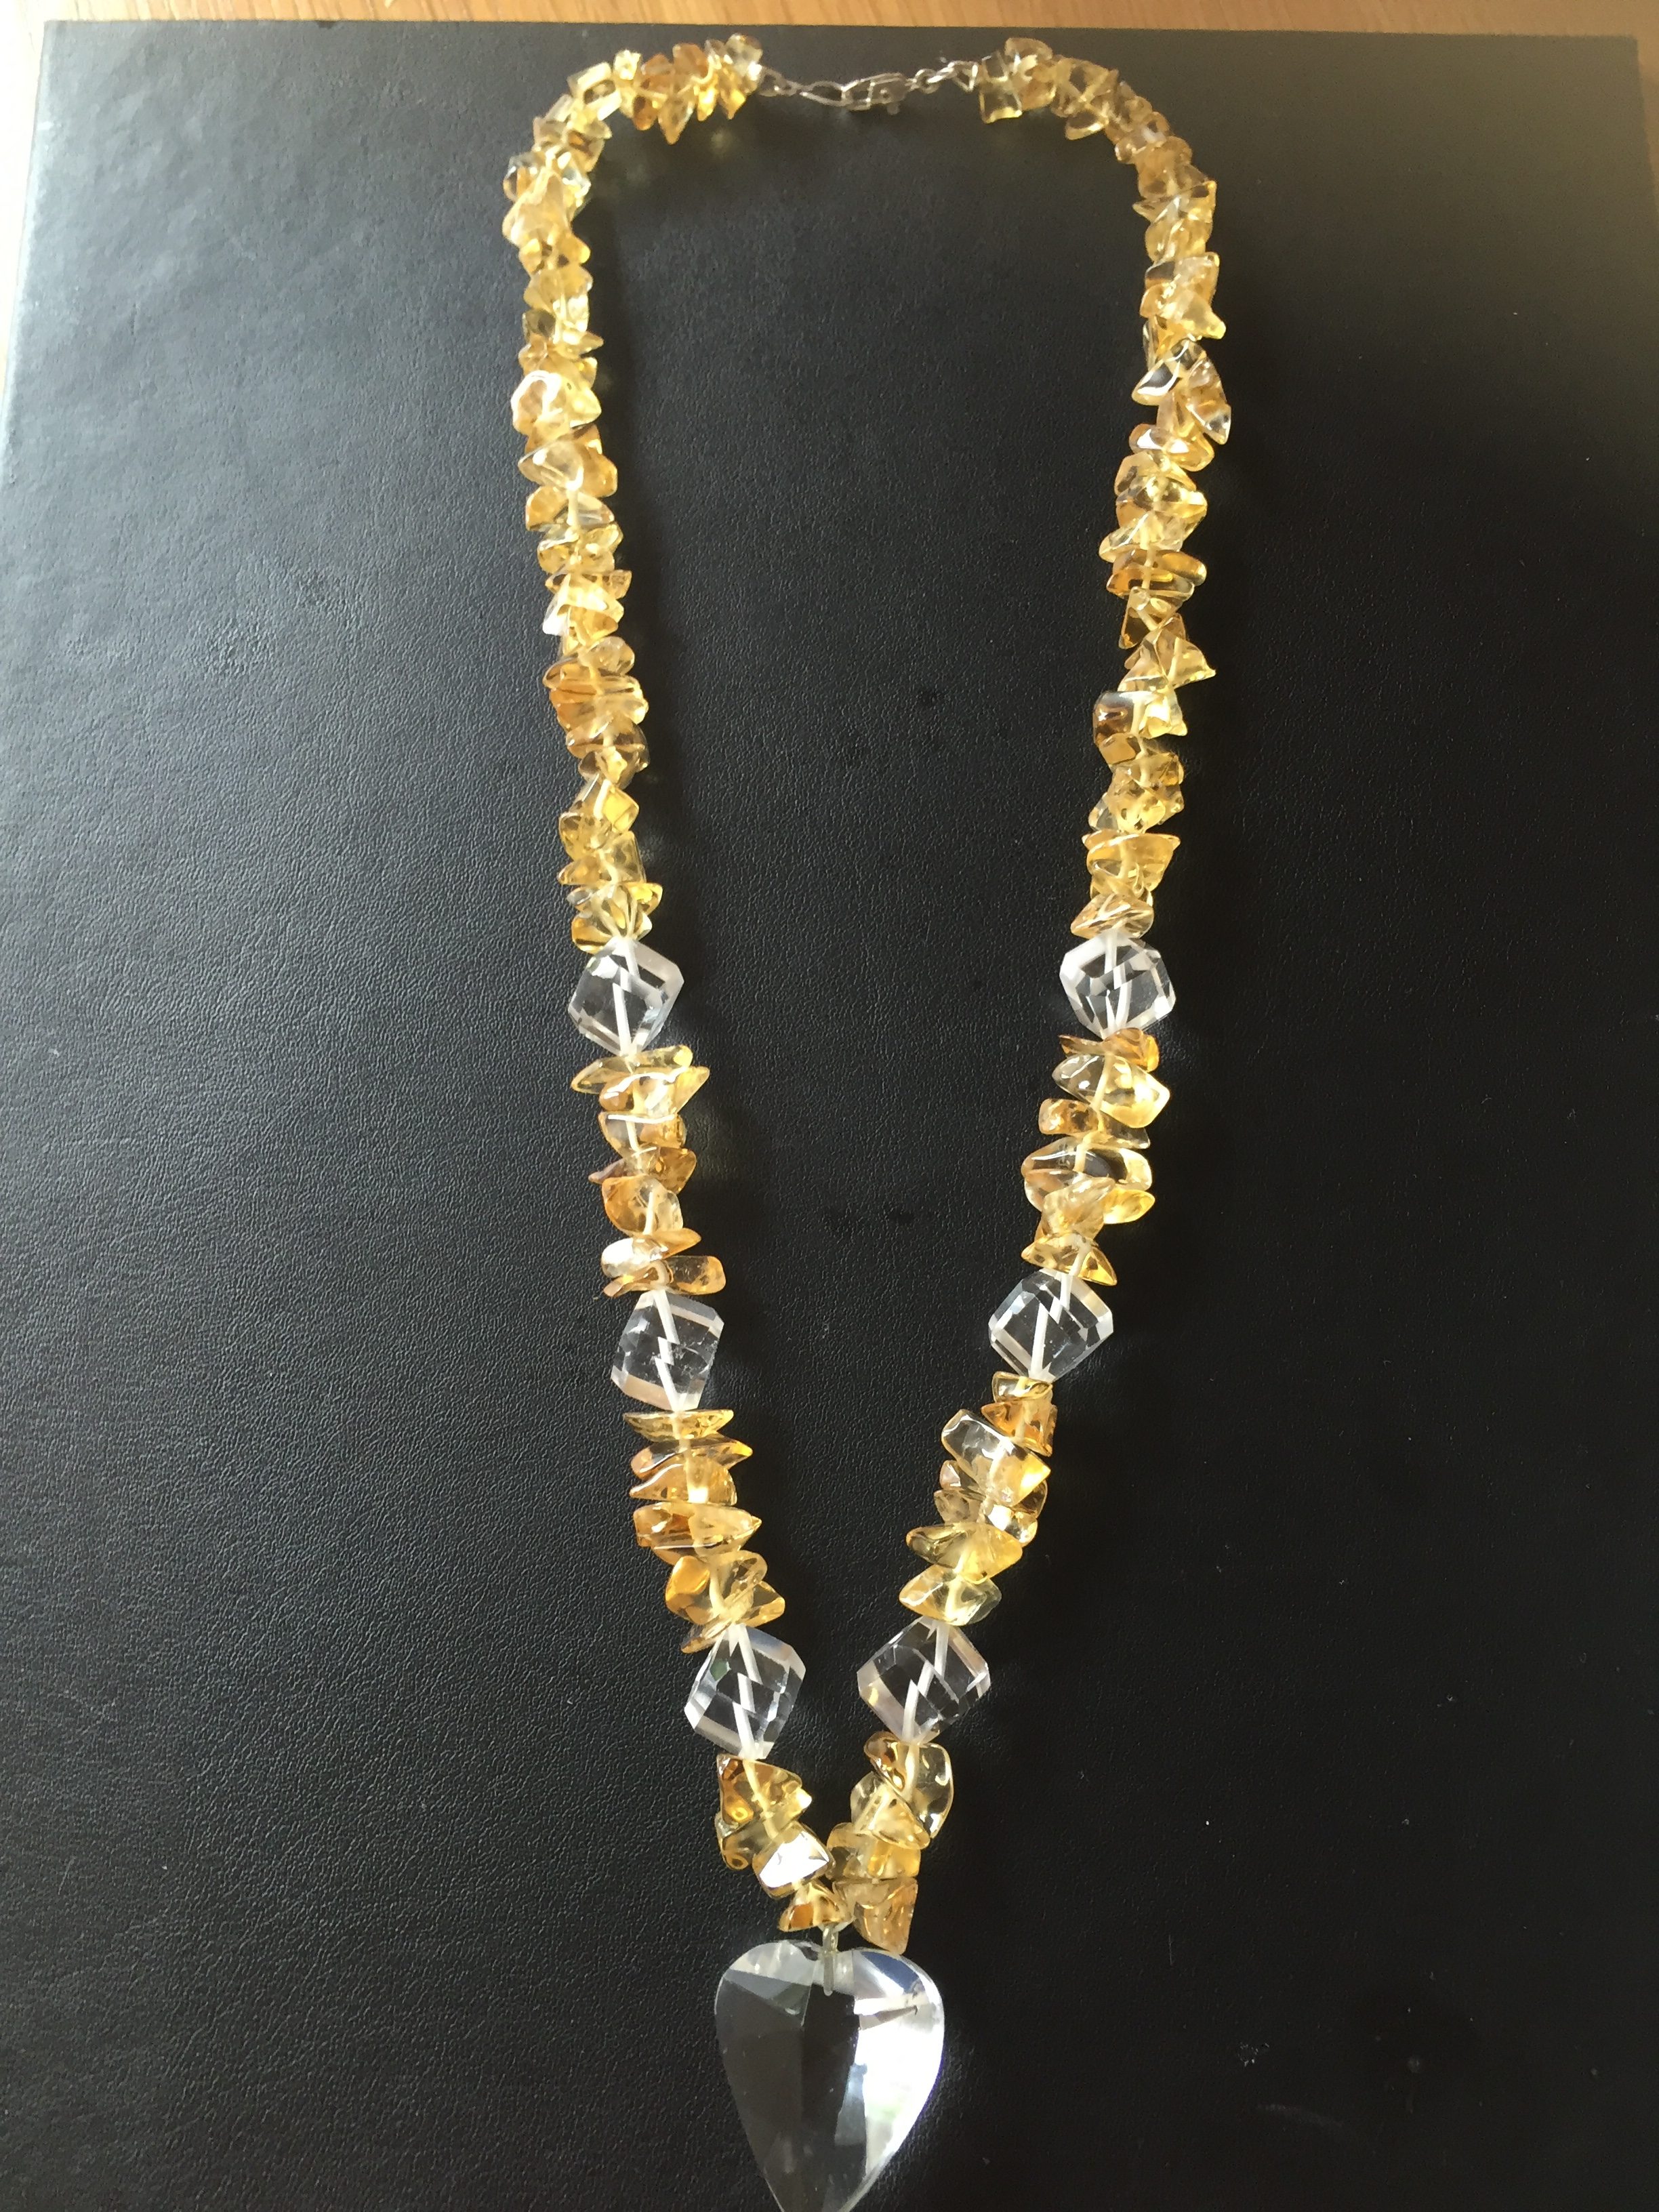 Citrine and Clear Quartz Crystal Necklace 18